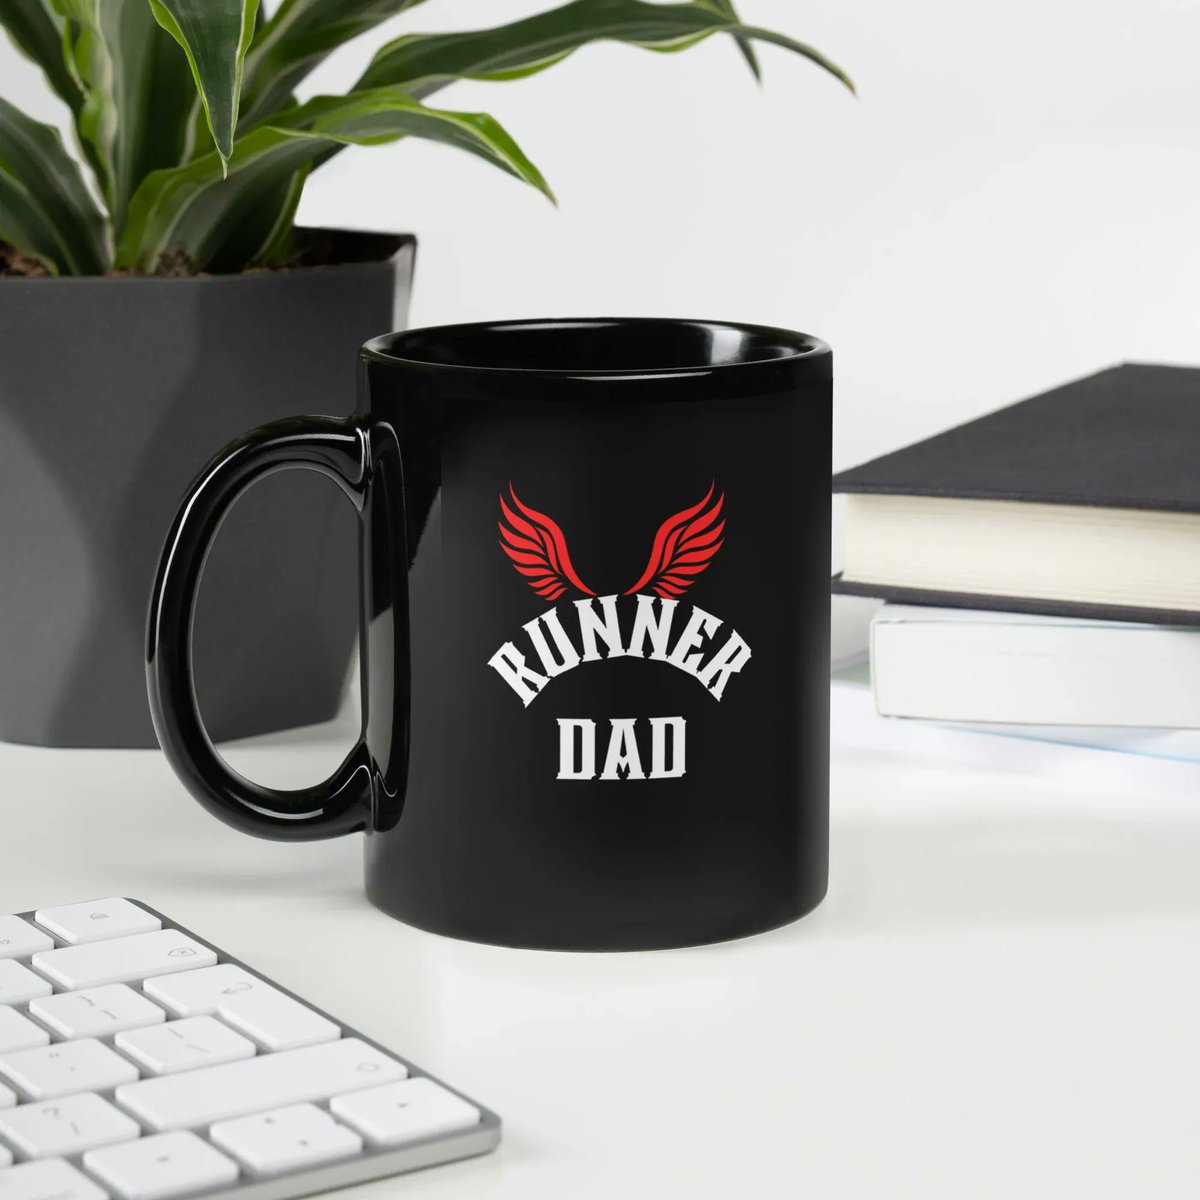 It's never late for a gift. The thought still counts!

But hurry while the deal lasts! 

Father's Day Gifts at 20% off with code COOLDADS! 
Ends Today! 

#hikerunner #GenXDad #CoolestDad #DadSwag  #FathersDay #fathersdaygifts 

Shop Now ⬇️⬇️⬇️
buff.ly/3qSFveY